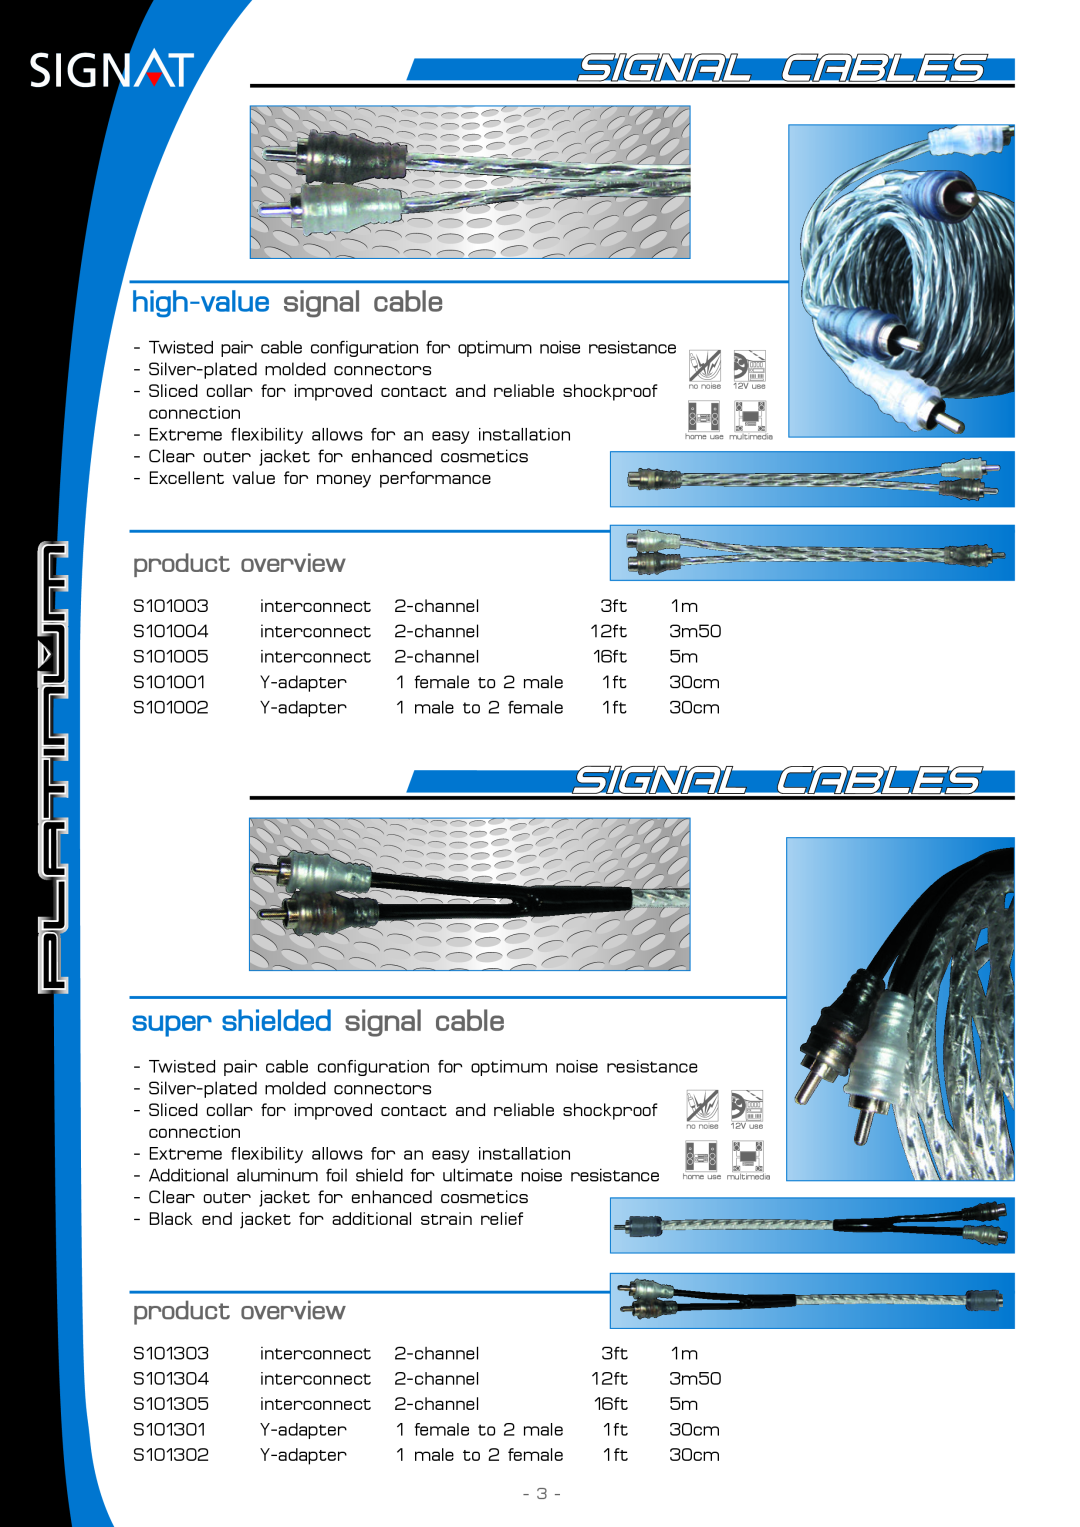 Signat S104201, S104001, S104105 manual high-value signal cable, super shielded signal cable, product overview 